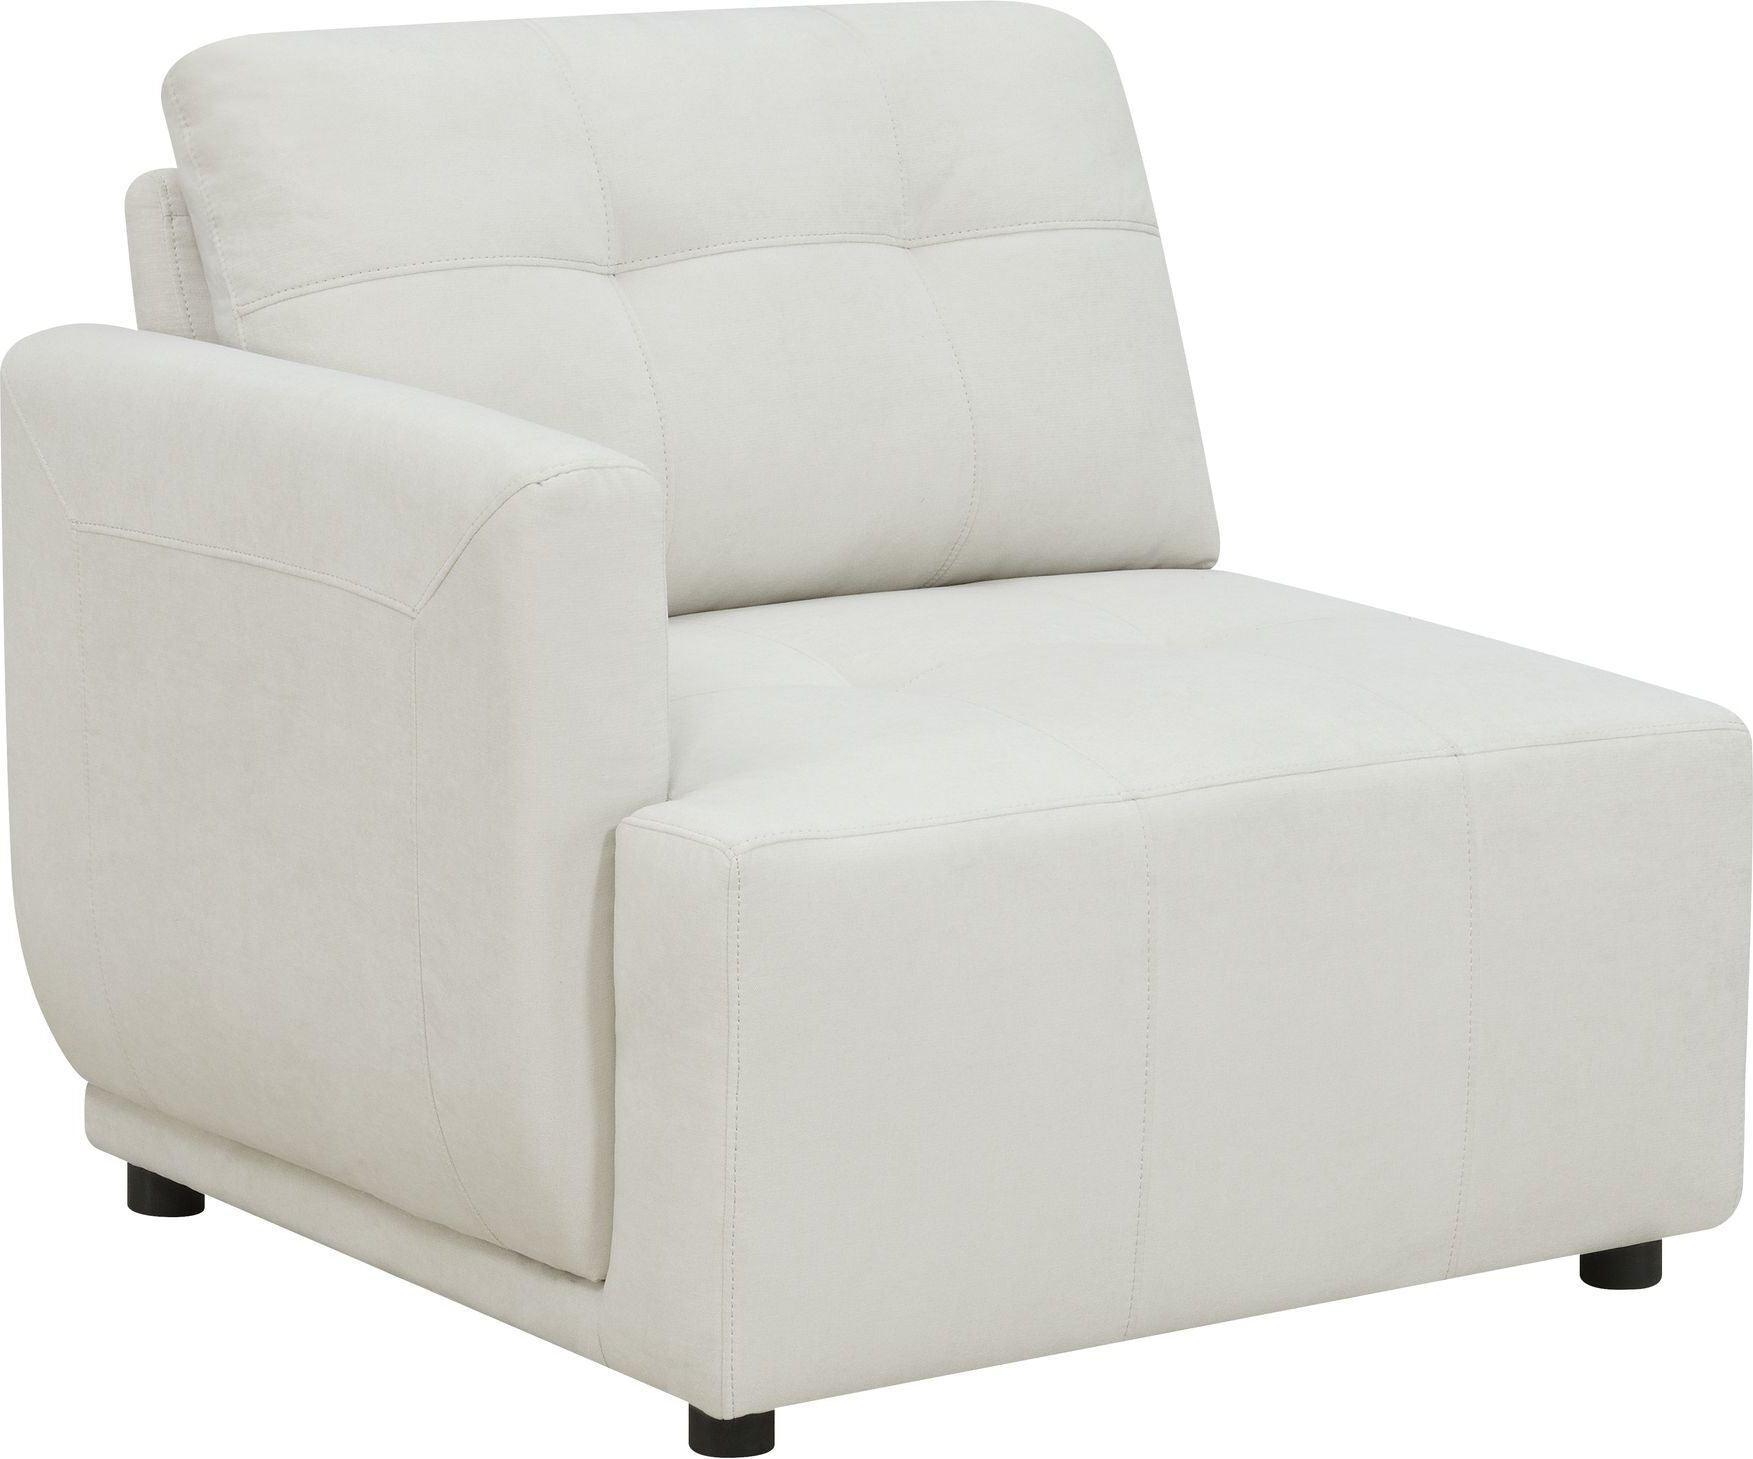 Elements Accent Chairs - Gianni Modular Left Hand Facing Chair With Pillow Natural